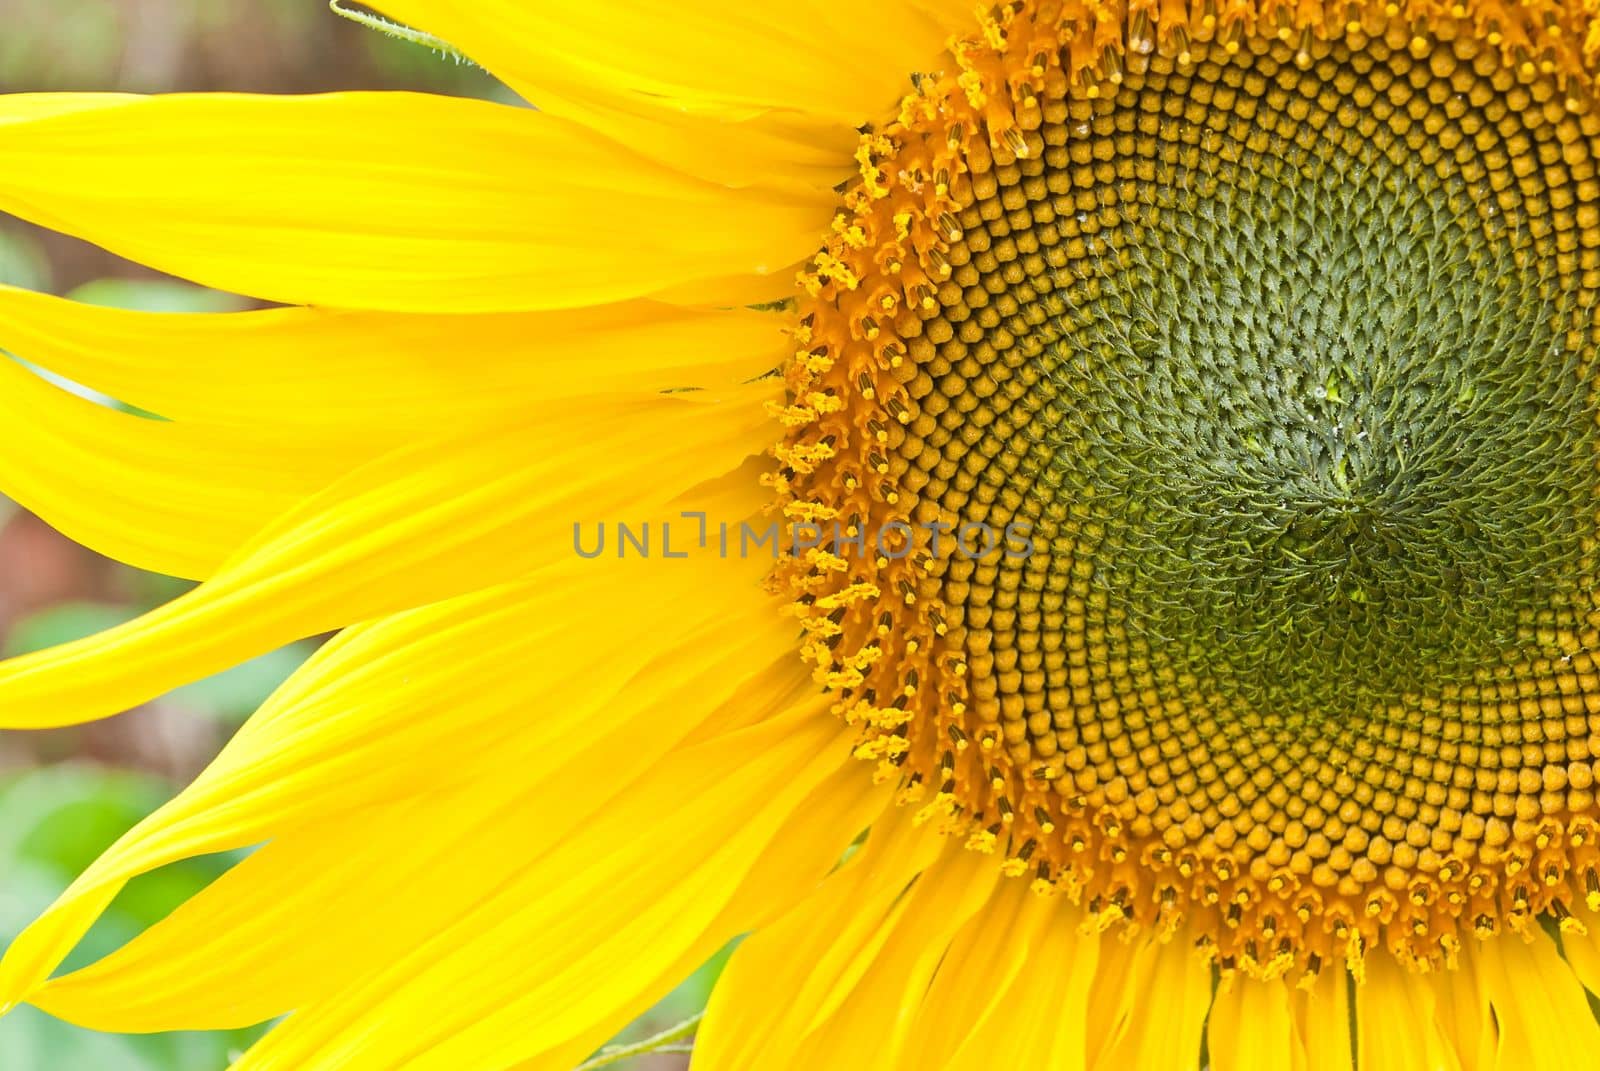 beutiful close-up sunflower in cultivated agricultural field by rakoptonLPN